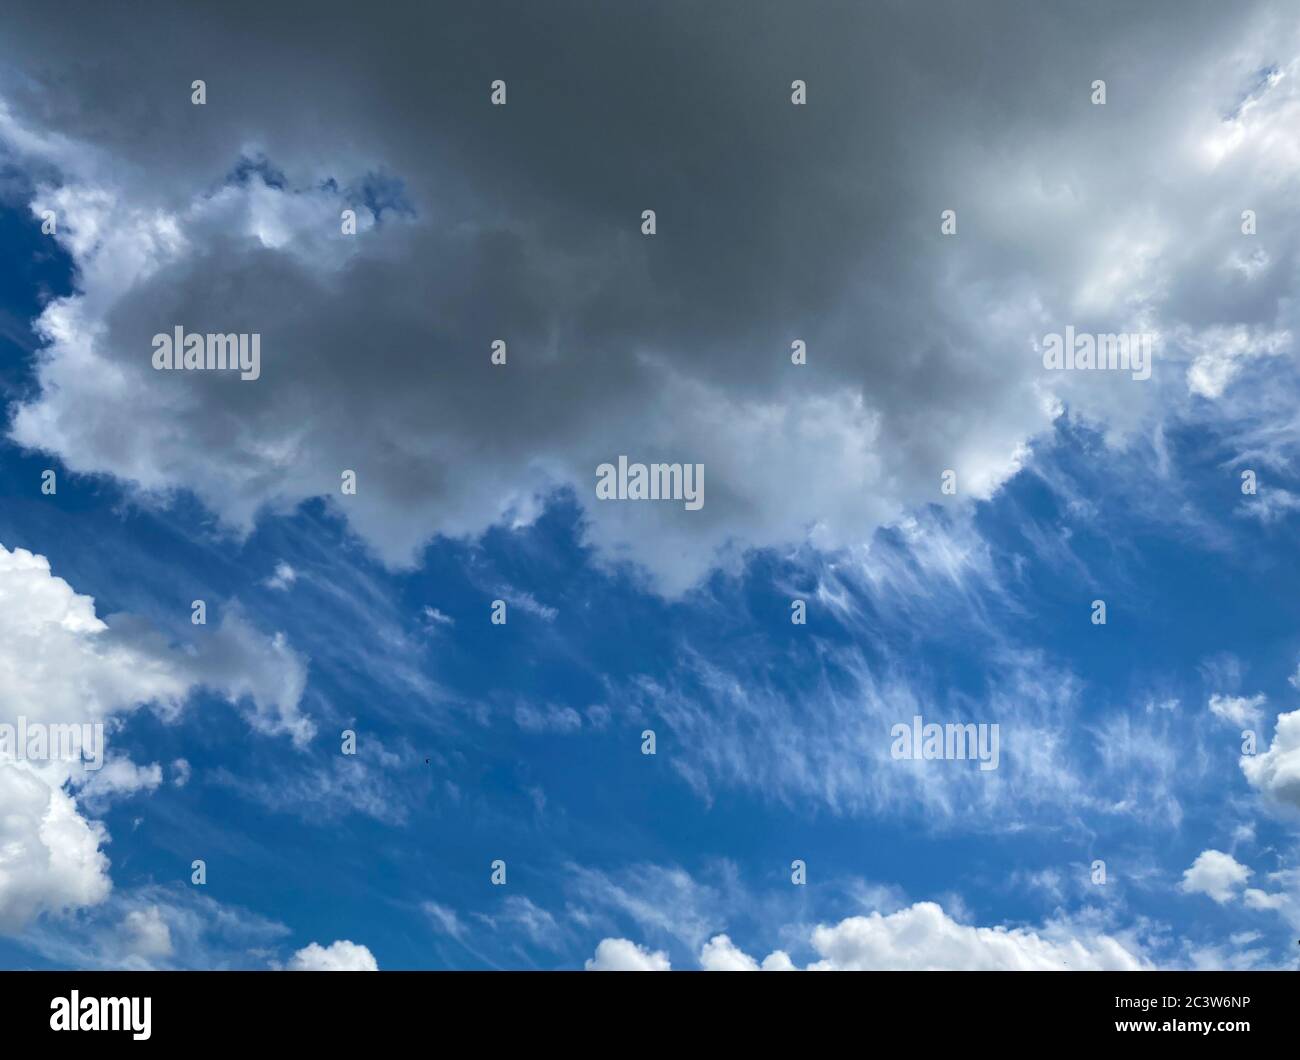 View into deep blue sky with stratocumulus and cirrus clouds on windy day announcing occasional summer rain showers Stock Photo